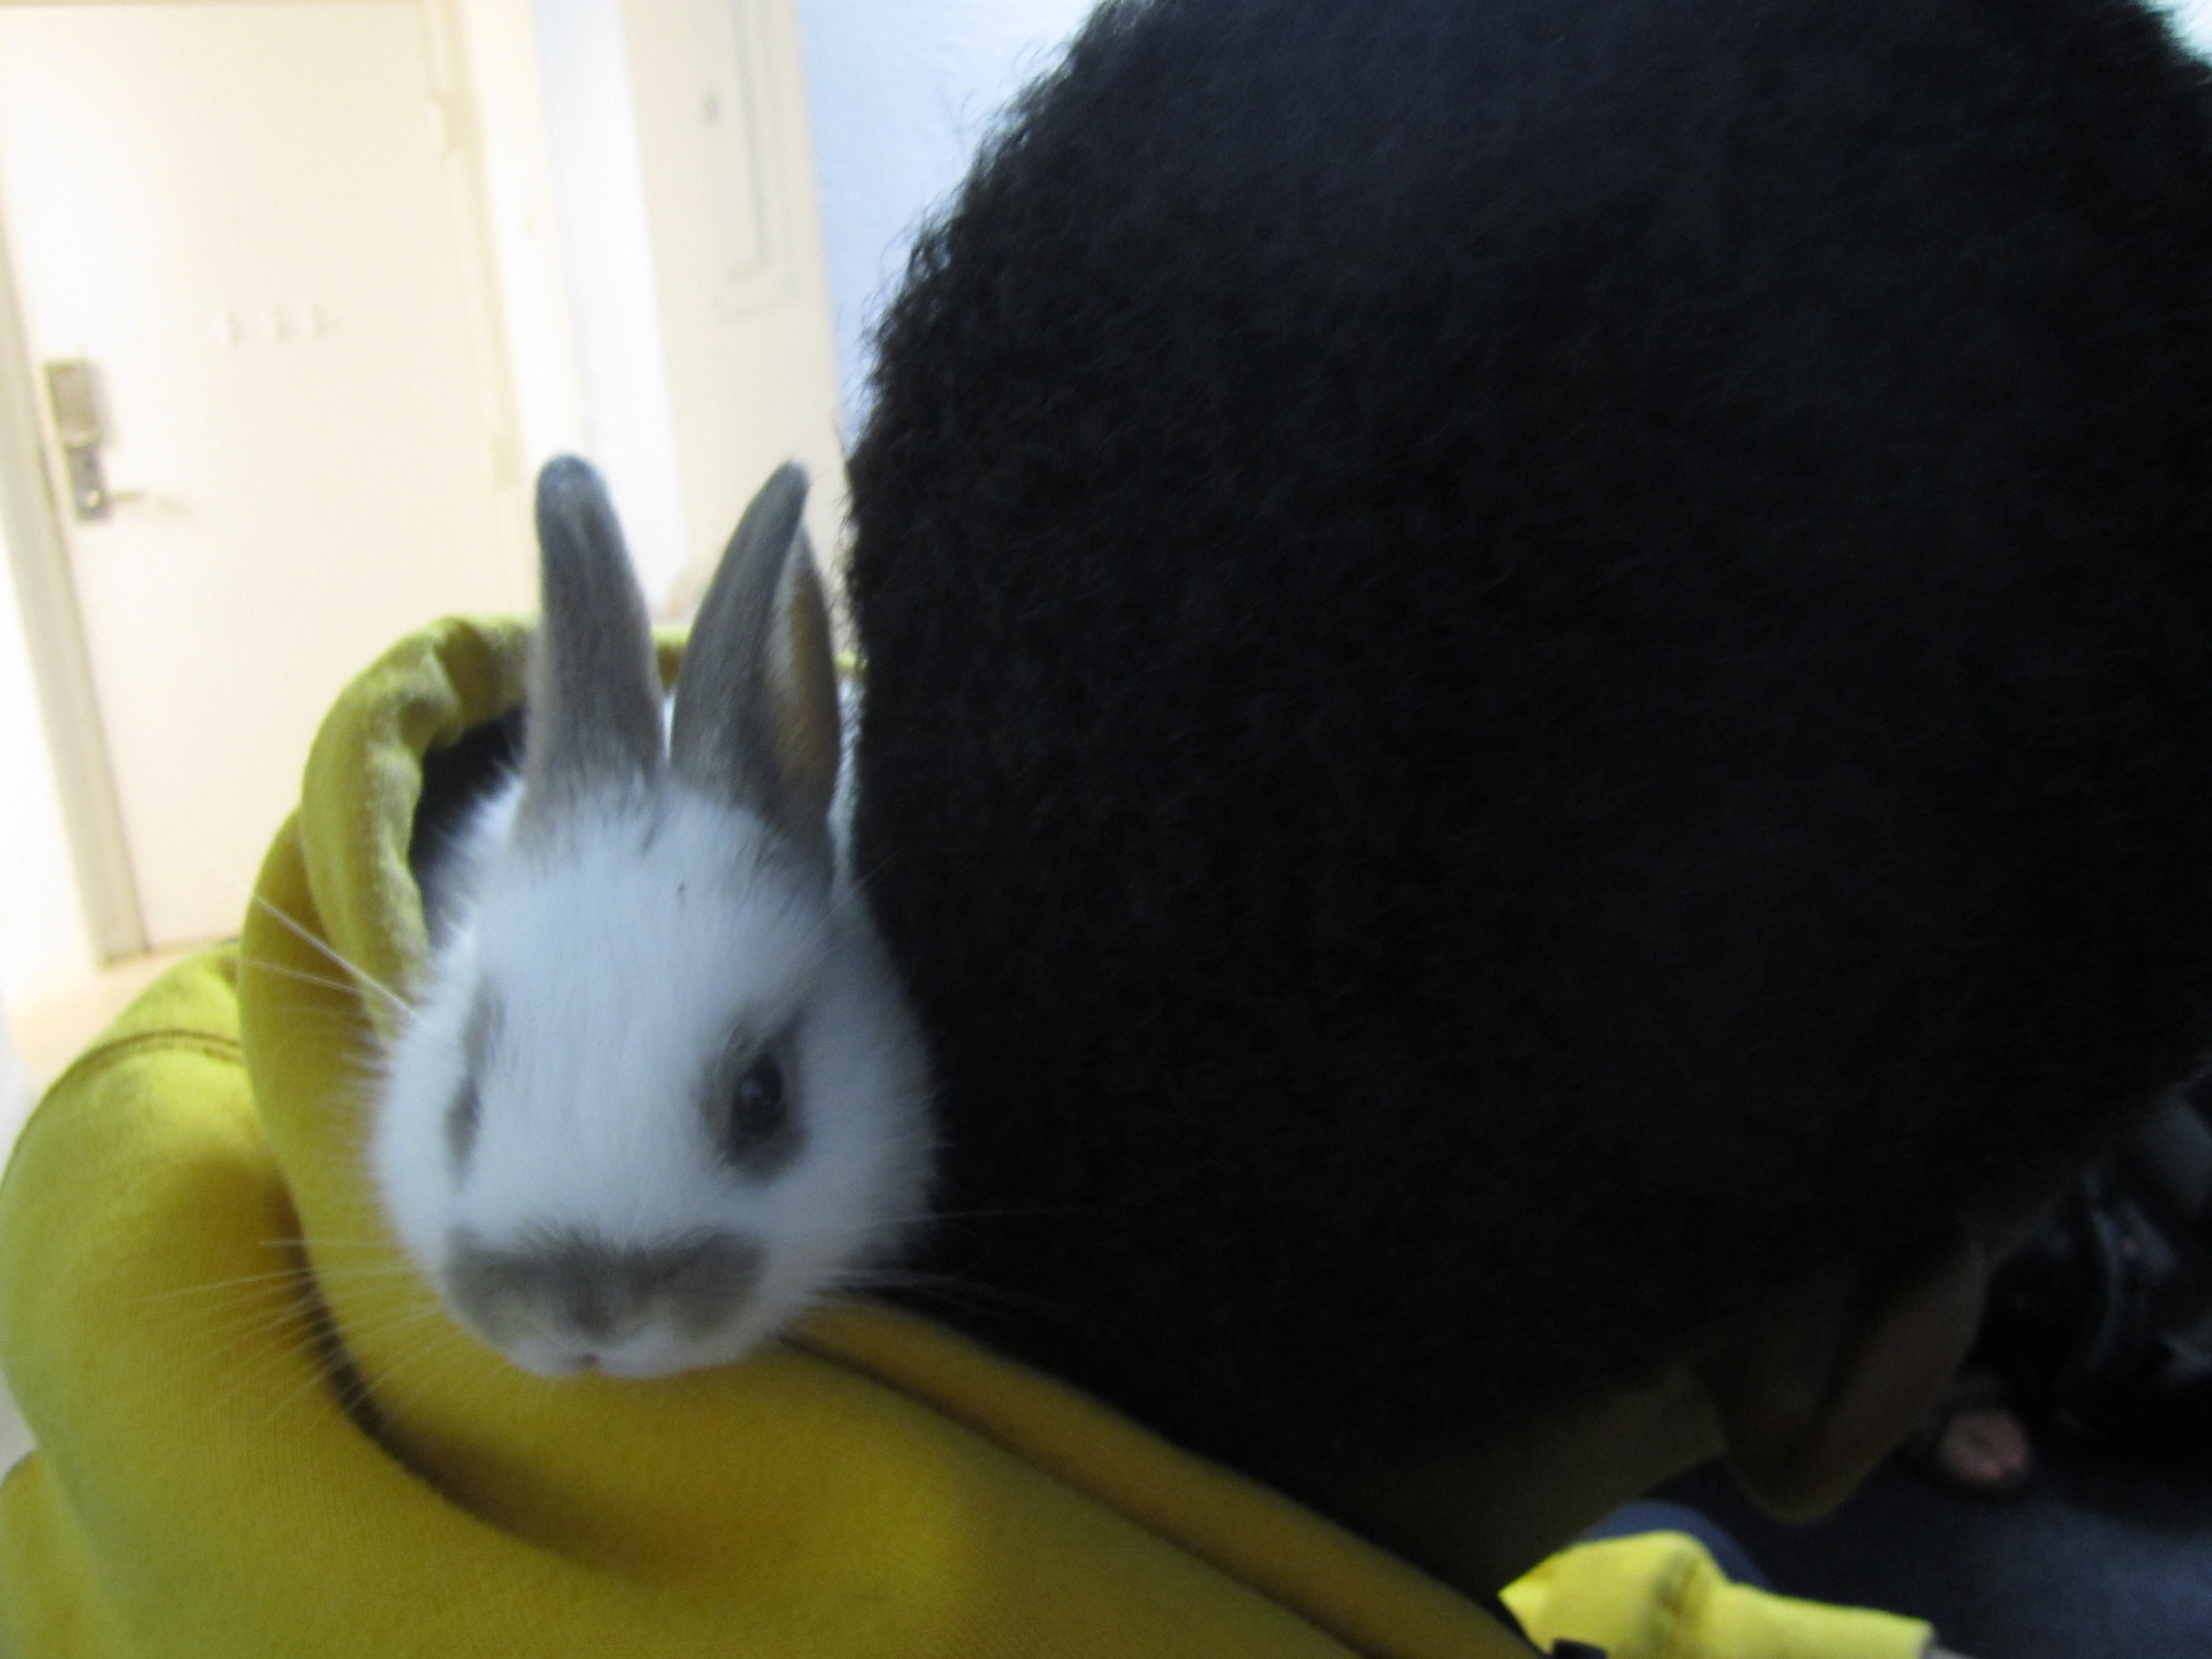 Bunny Found a Cozy Spot in Human's Hood